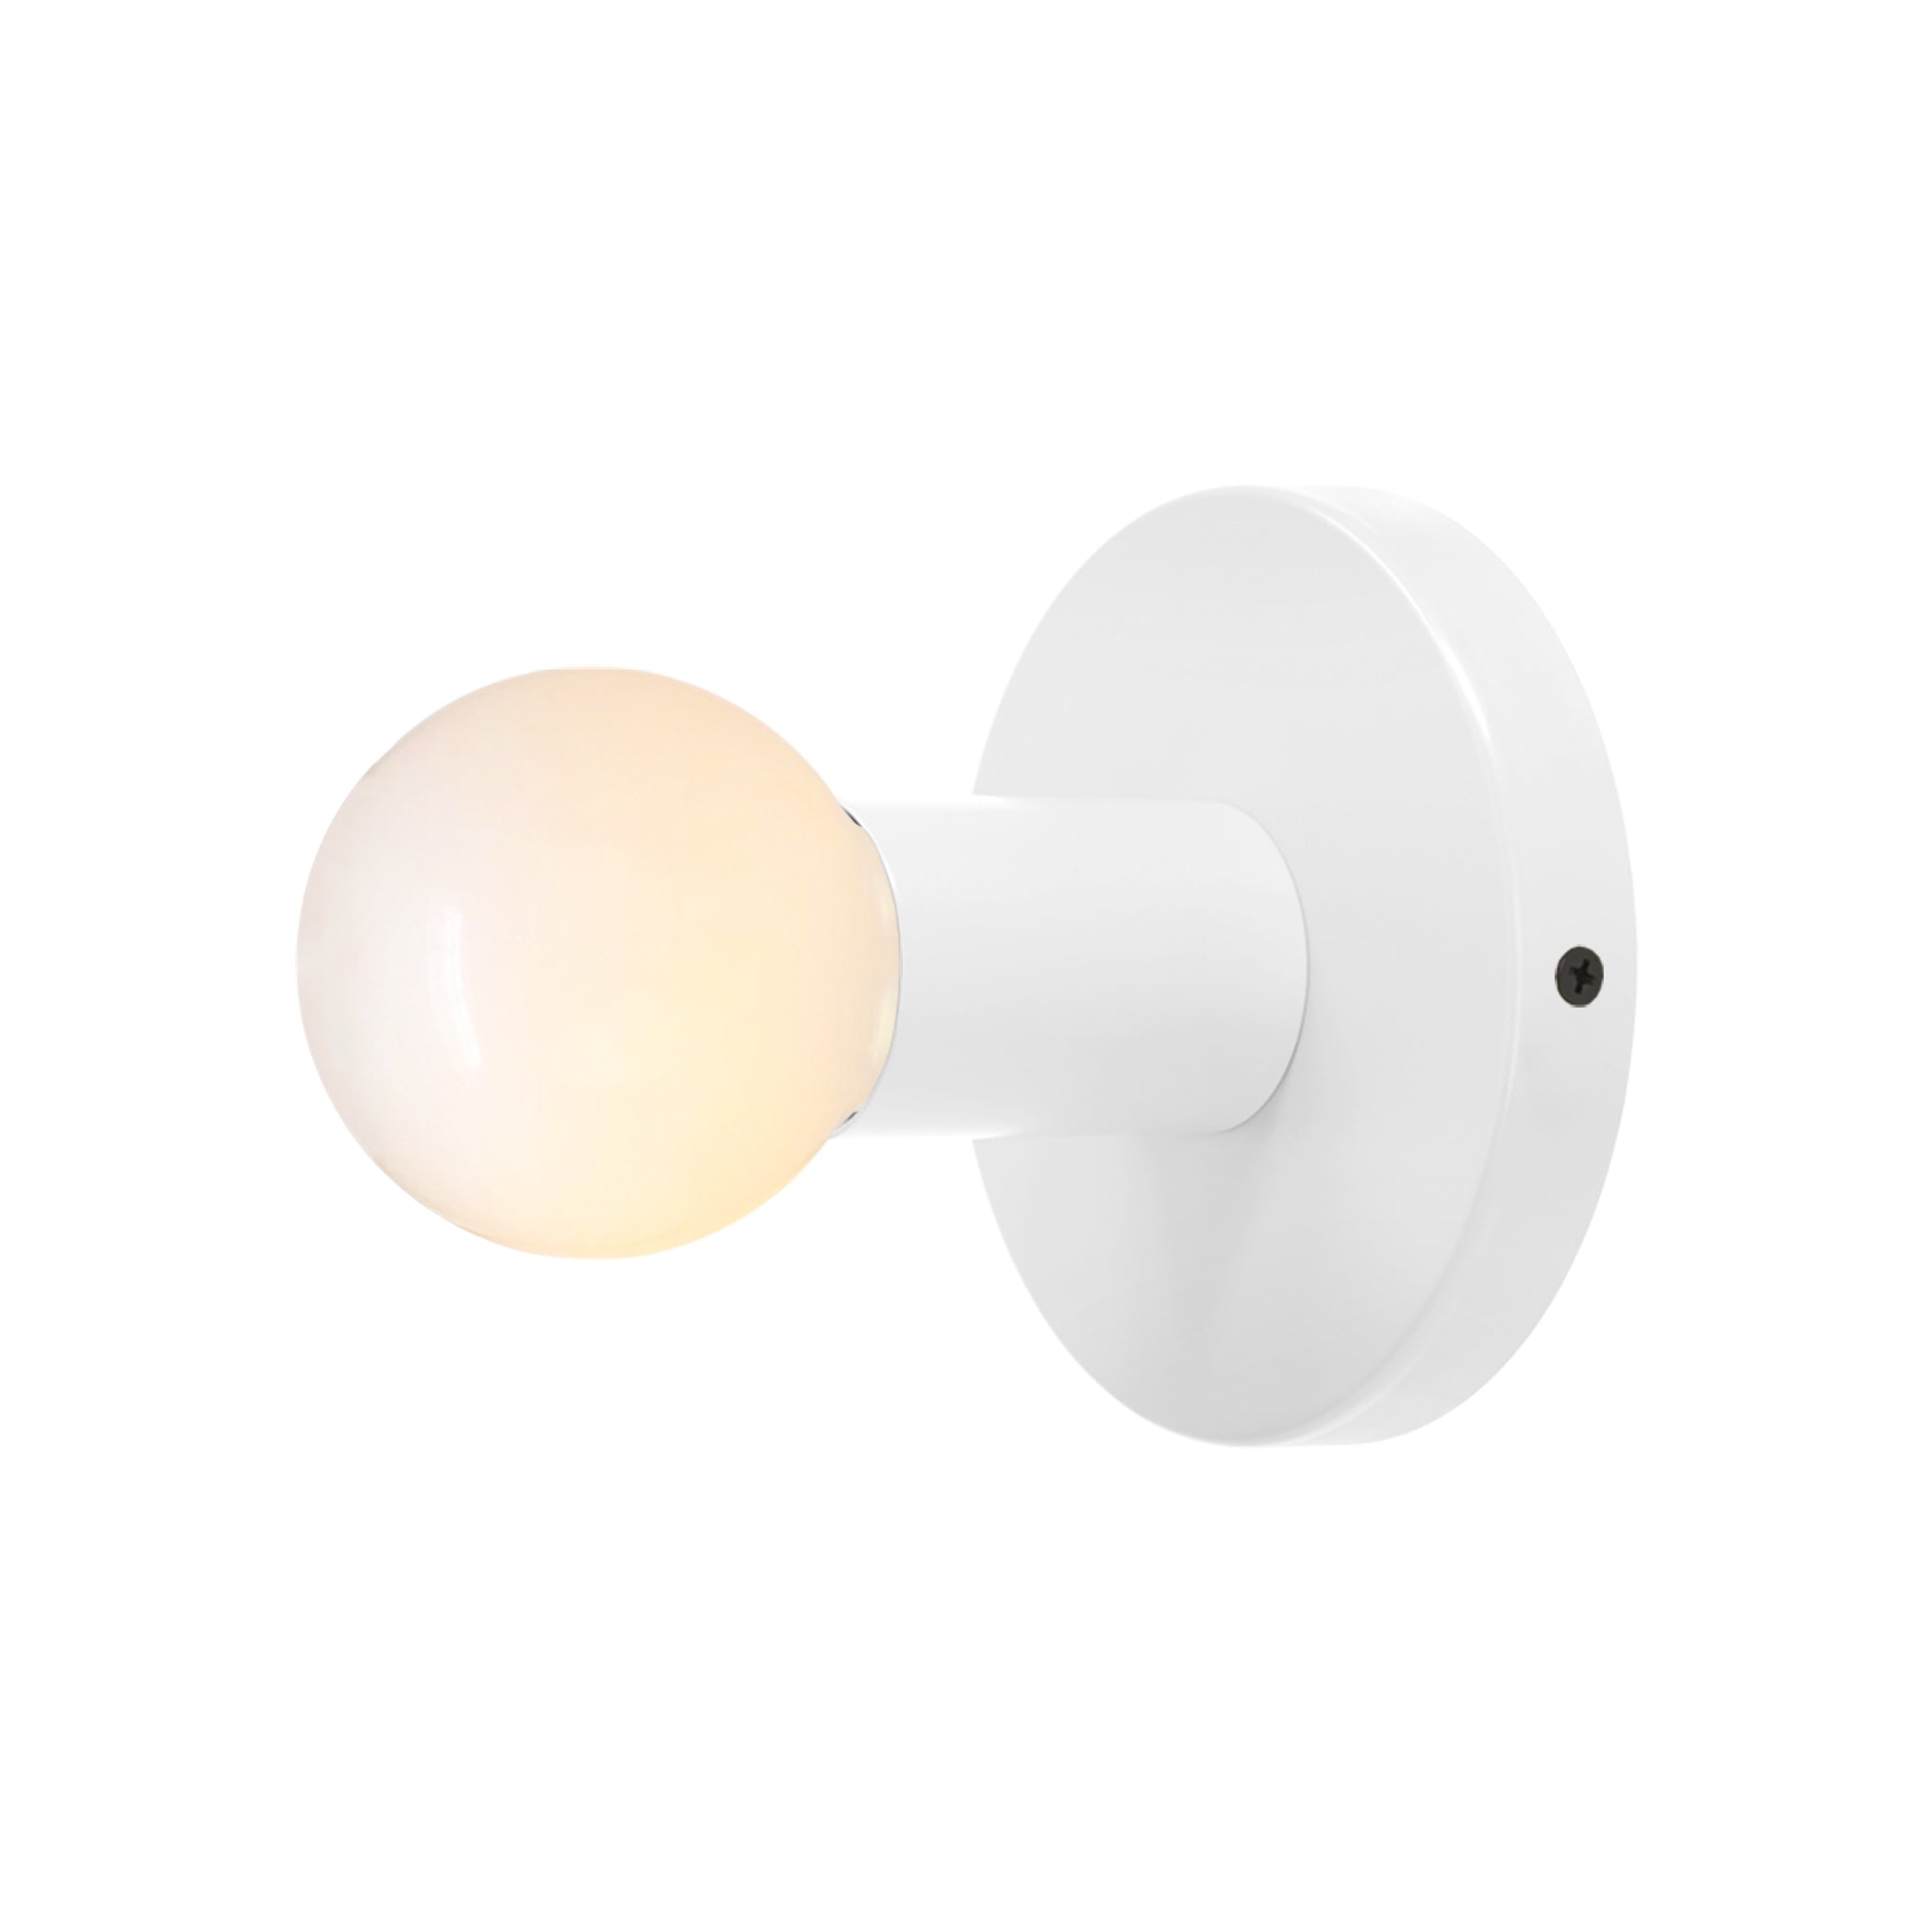 Black and white color Twink sconce Dutton Brown lighting